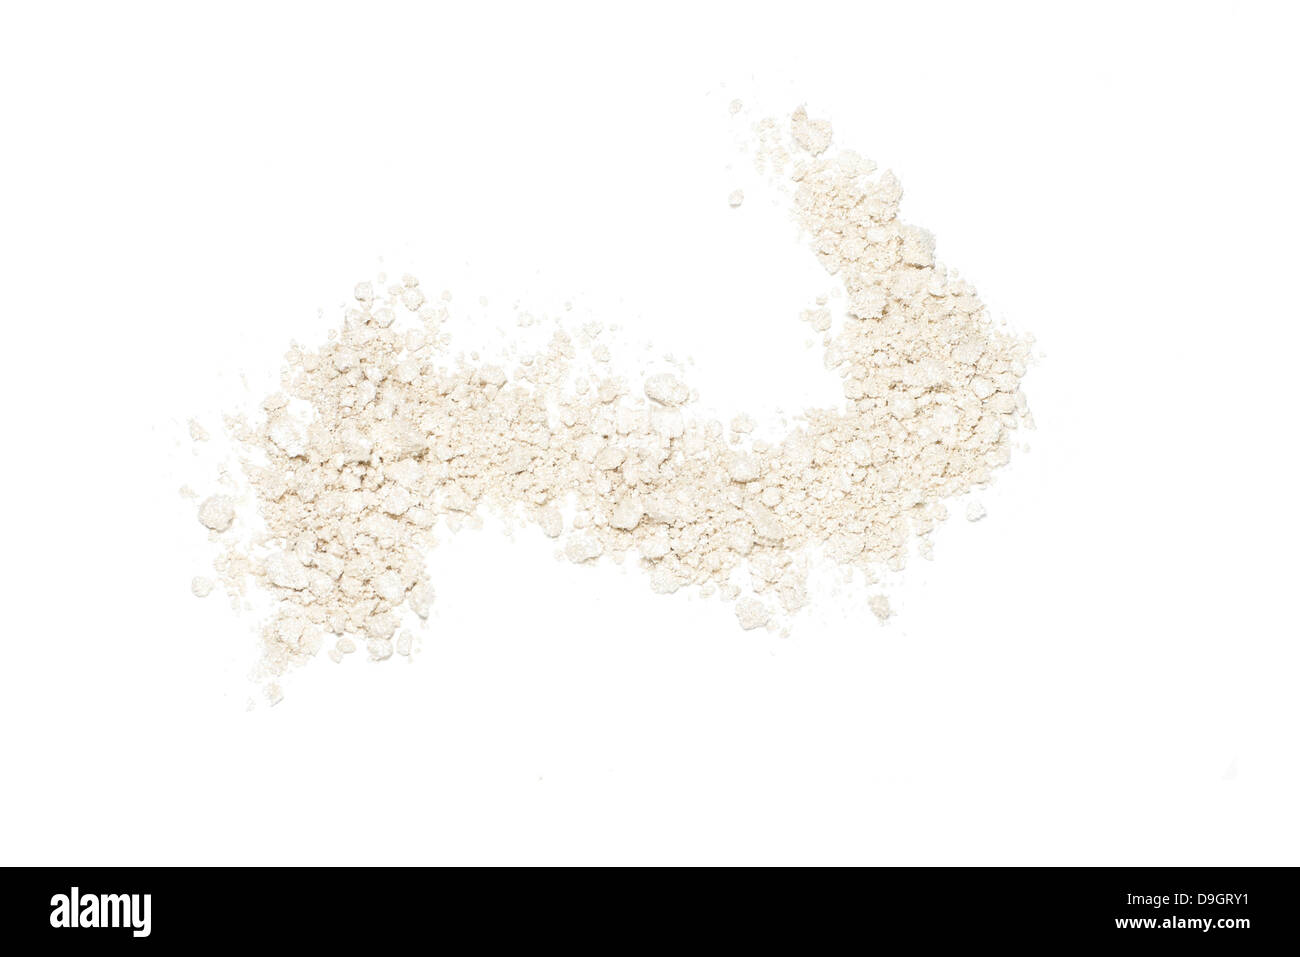 pile of loose white powder cut out onto a white background Stock Photo